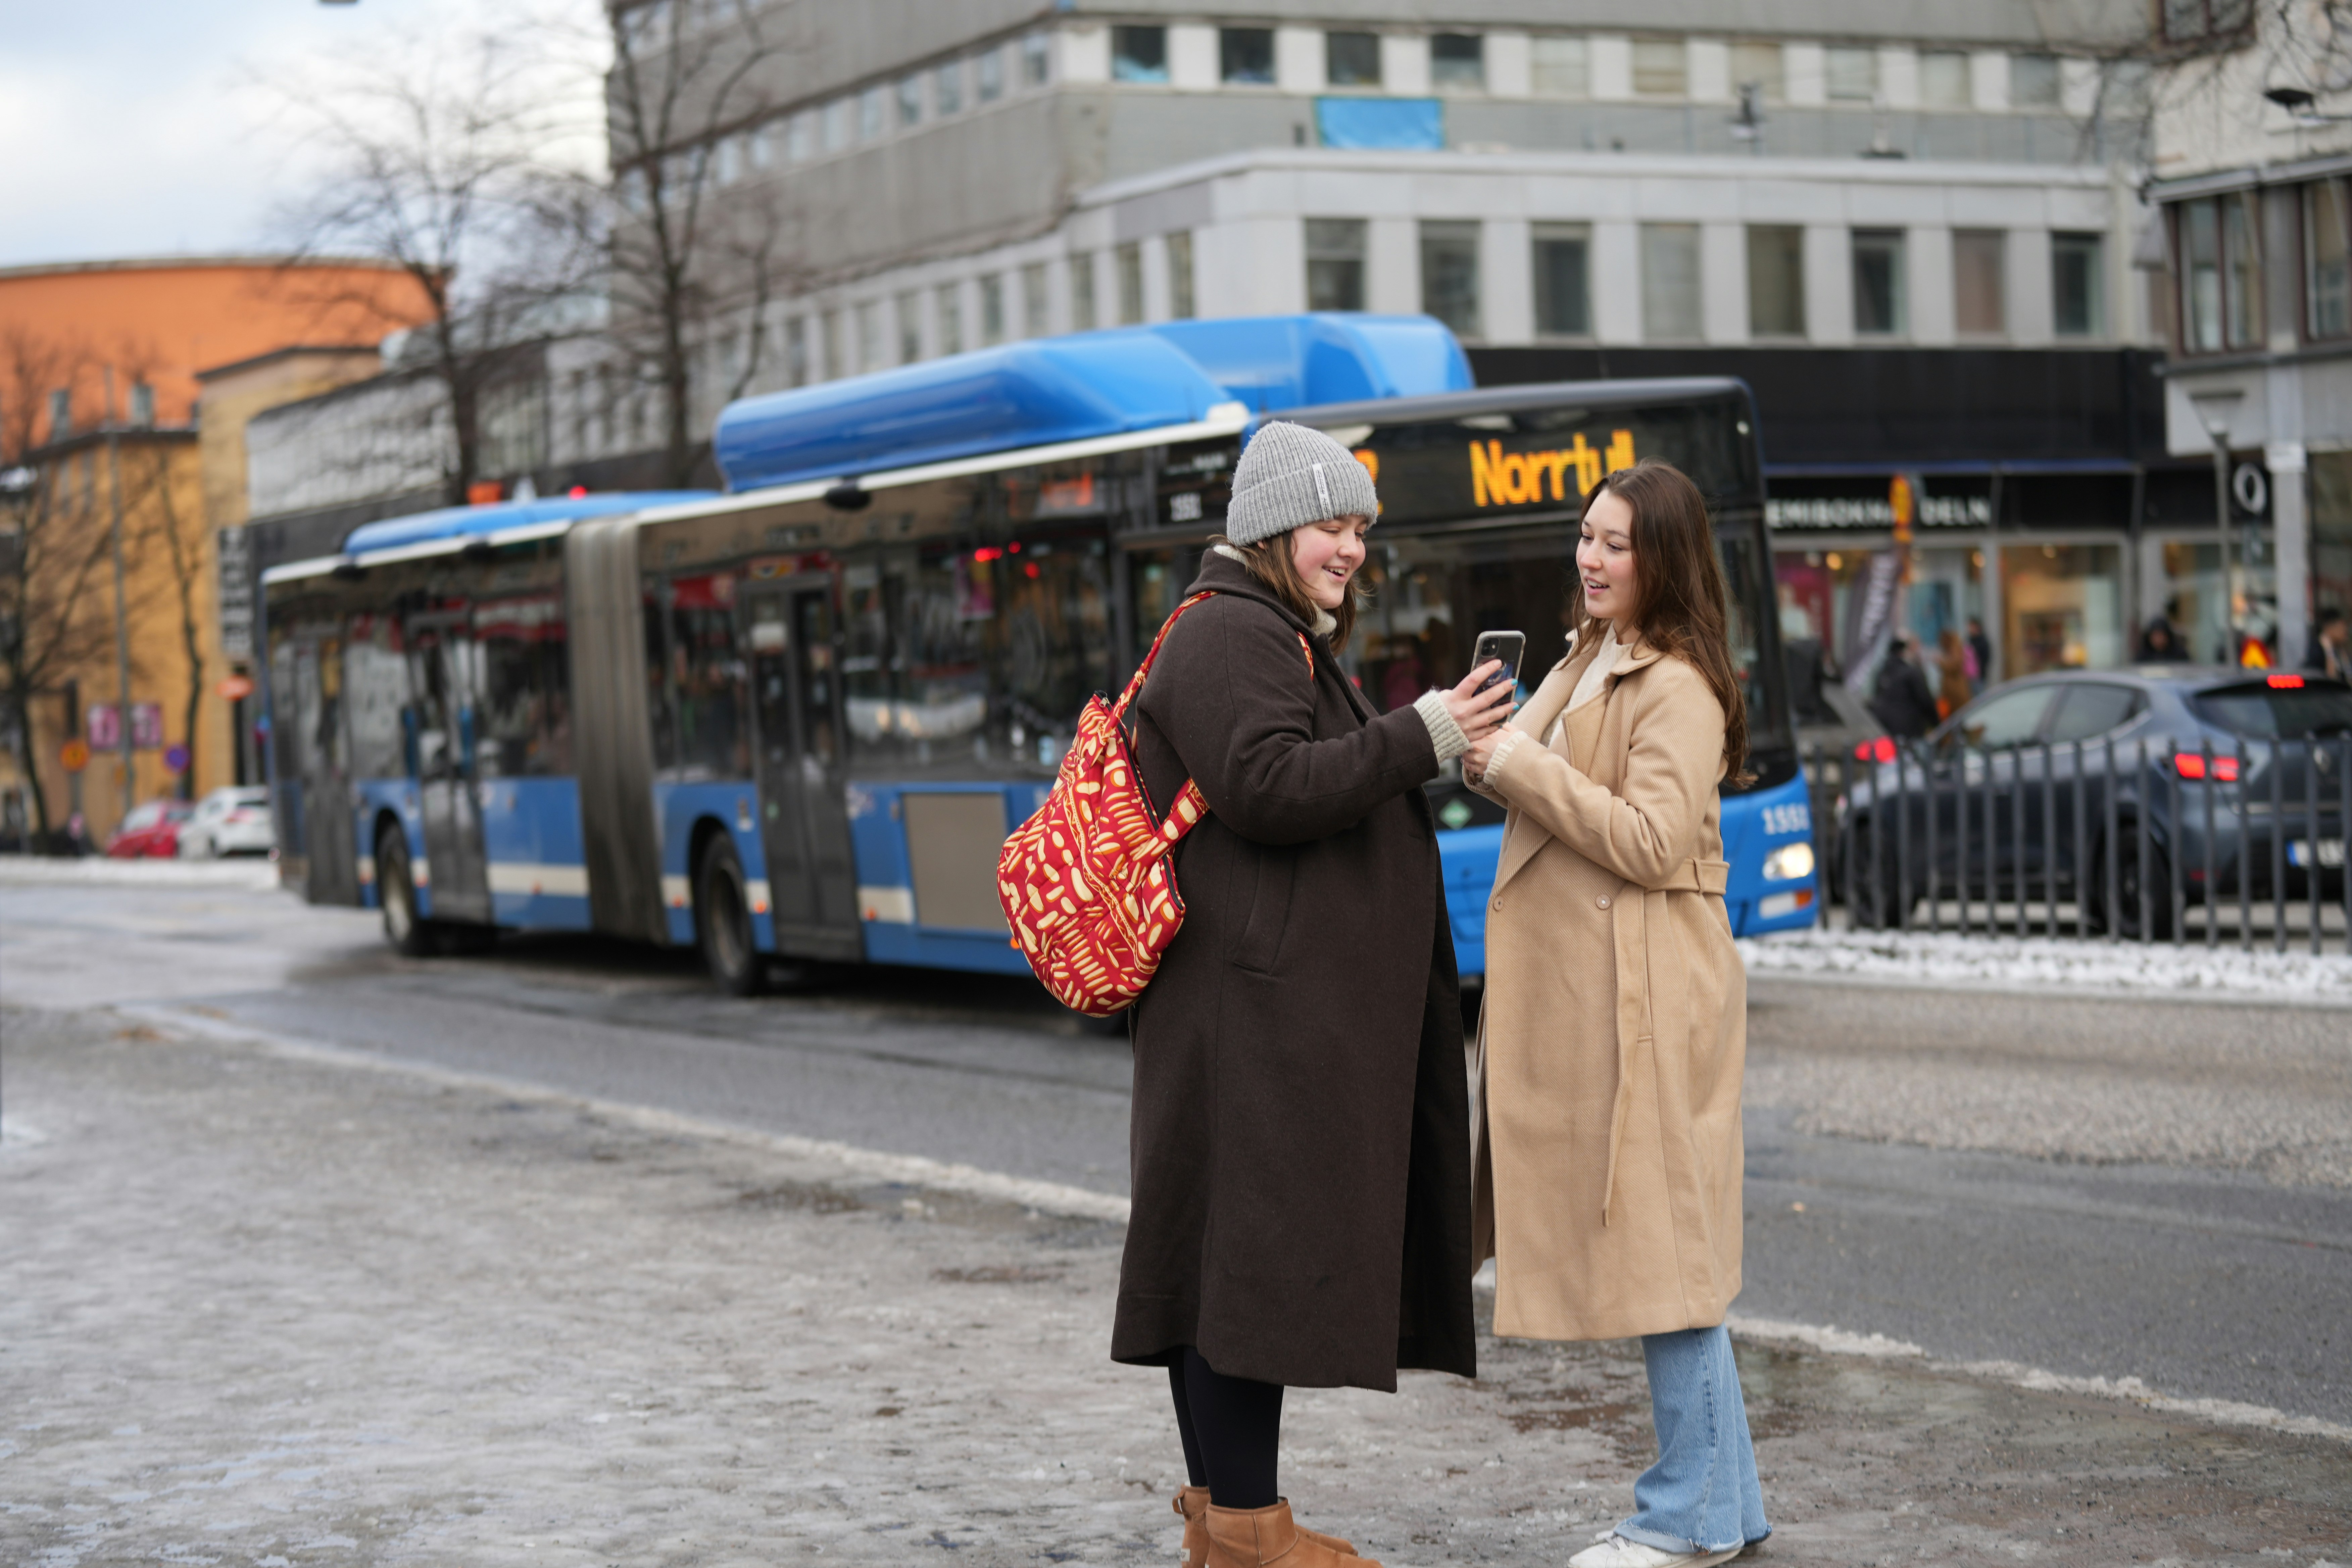 Two women chatting, their cell phone in hand, in front of a bus stop